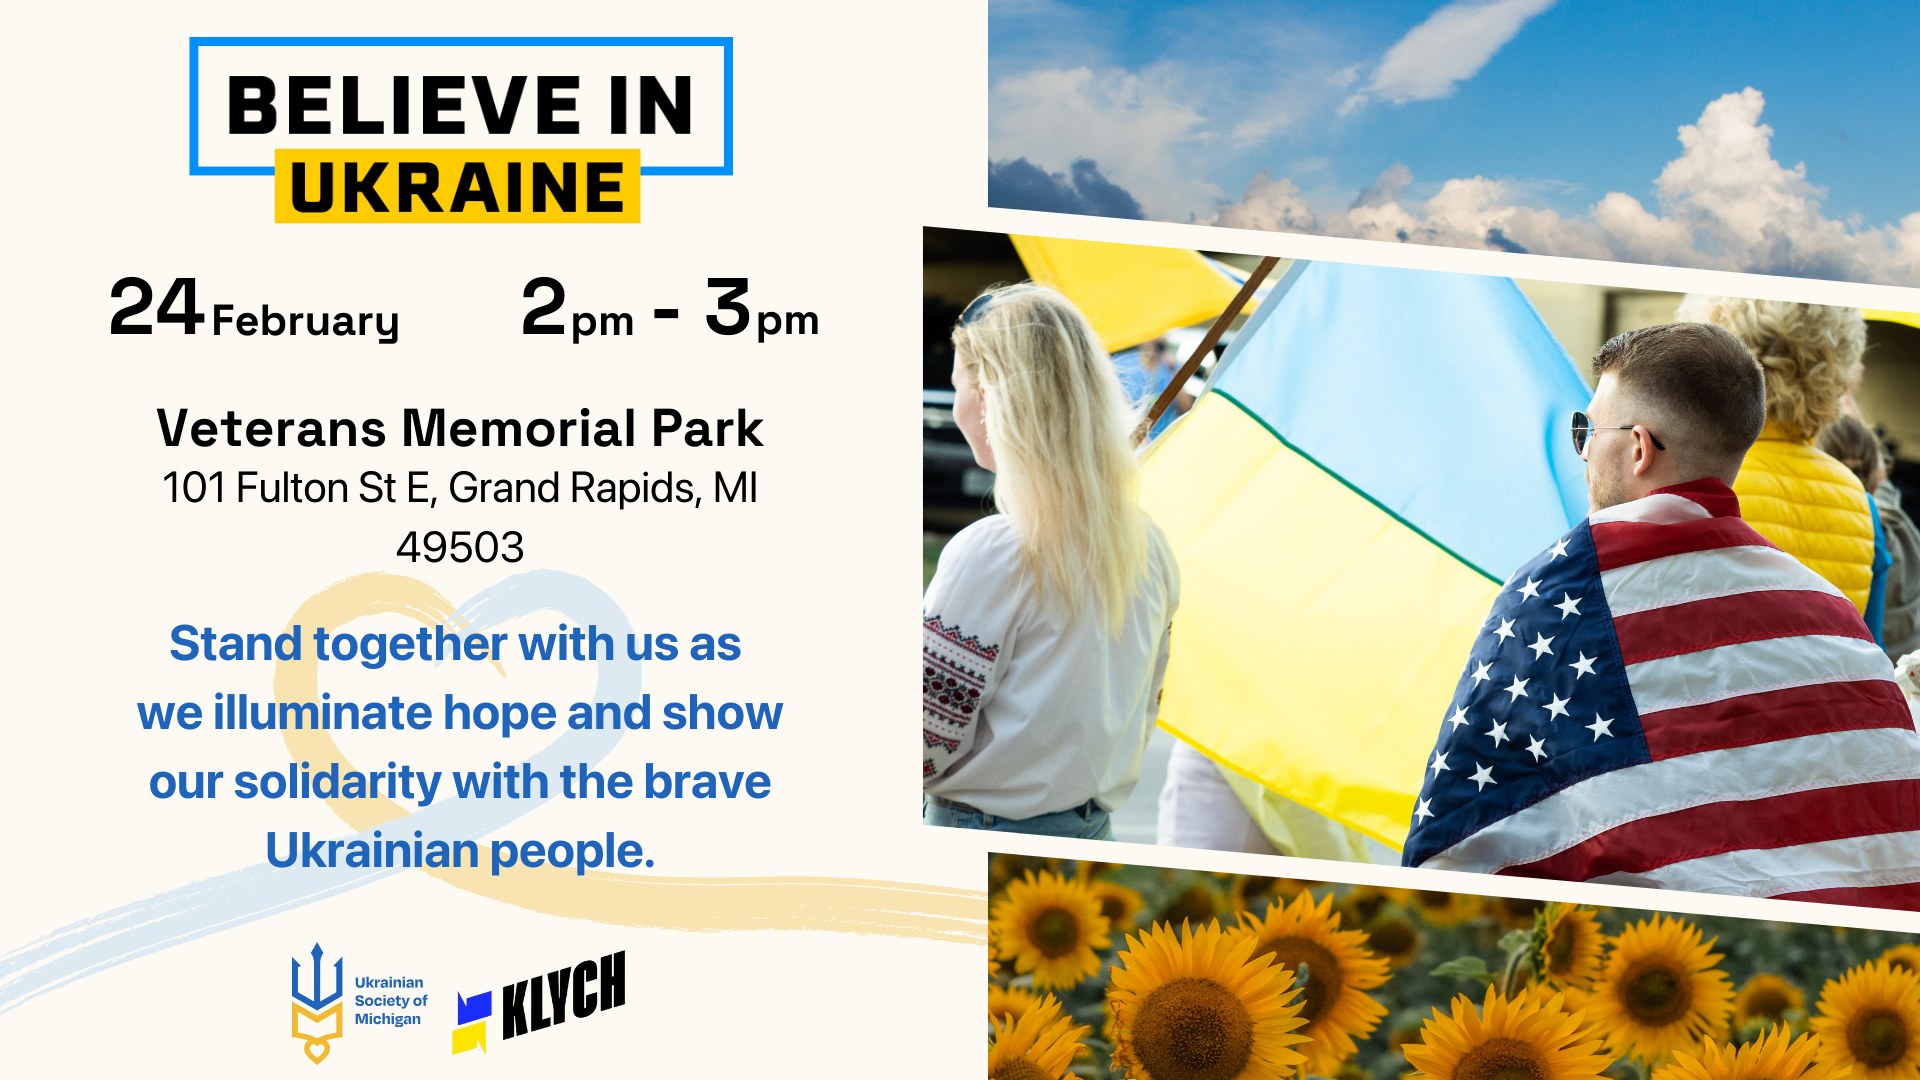 Believe in Ukraine - Event to Commemorate 2 years of Full-Scale Invasion